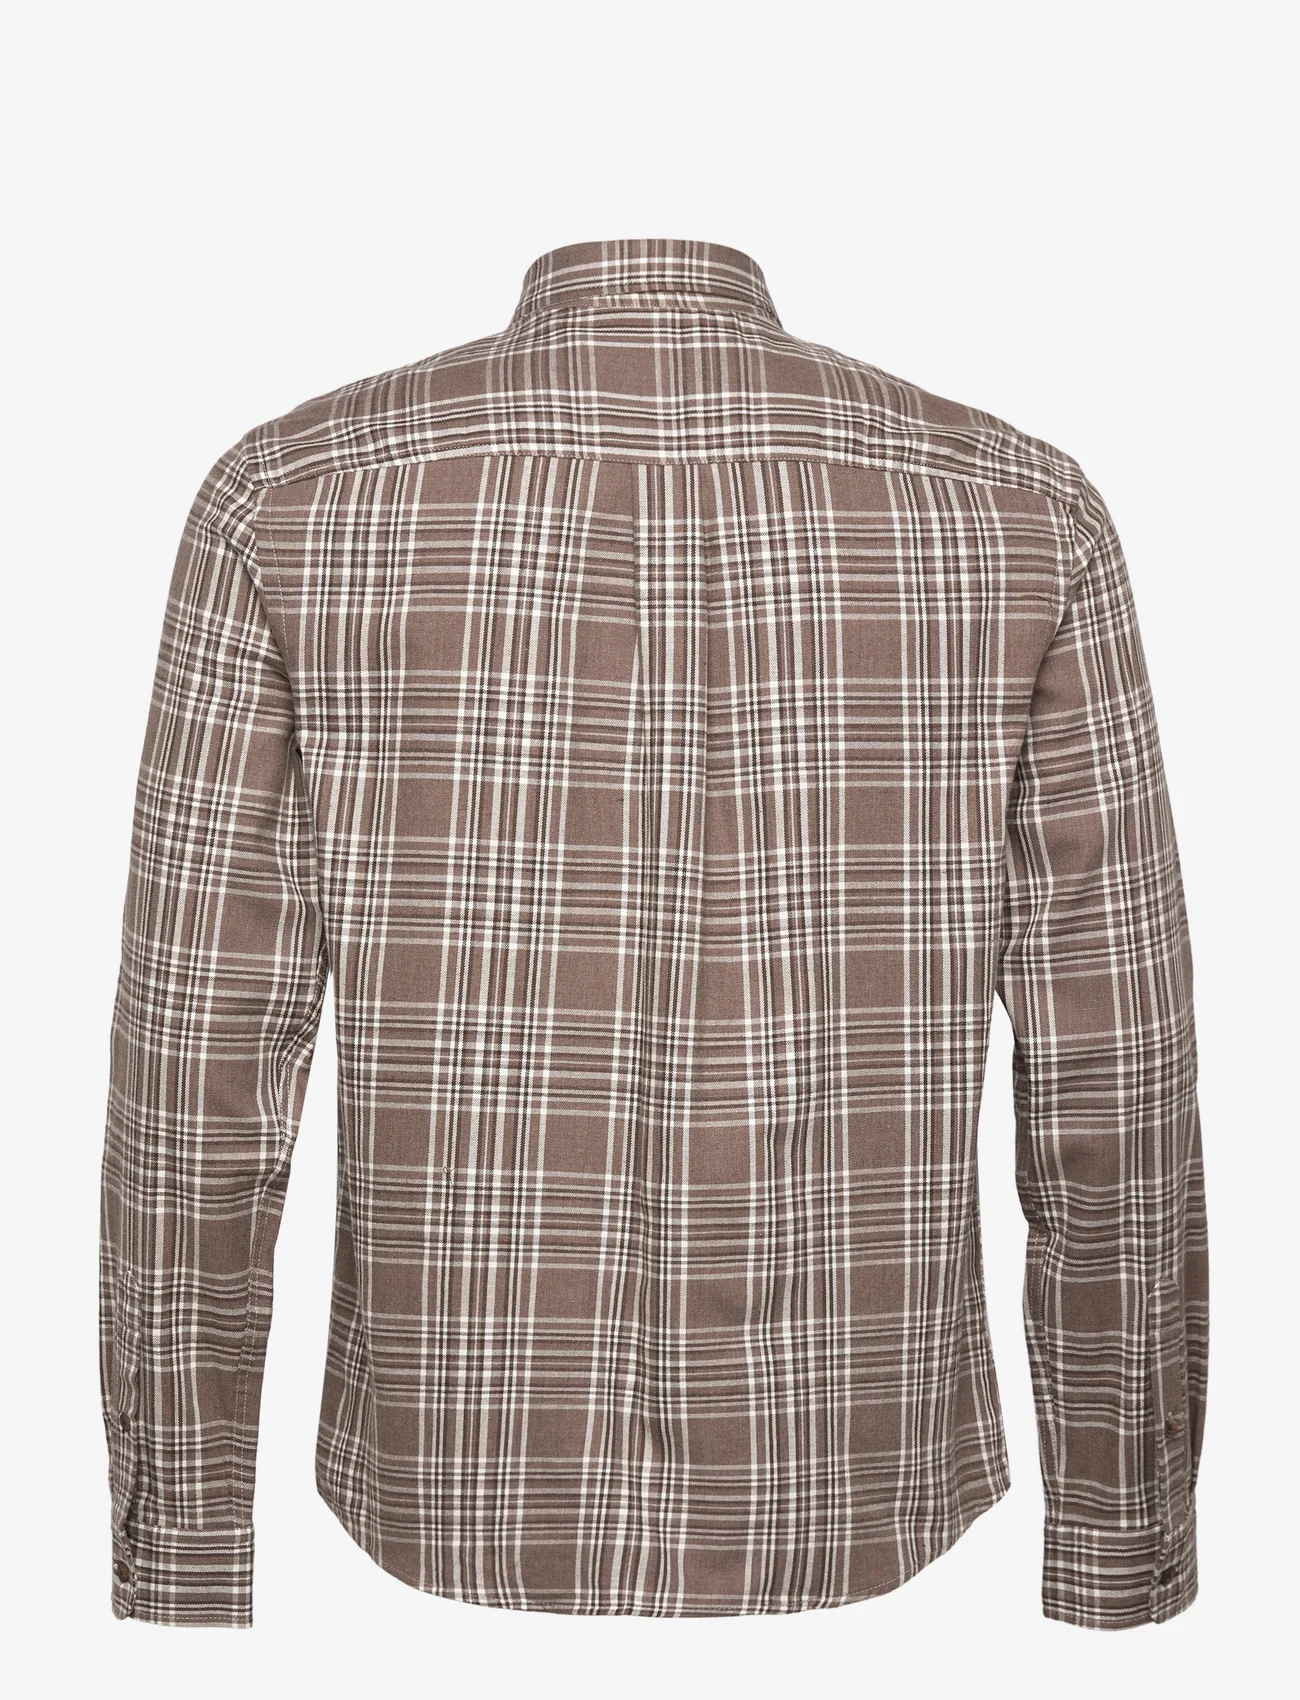 Lexington Clothing - Peter Lt Flannel Checked Shirt - brown multi check - 1